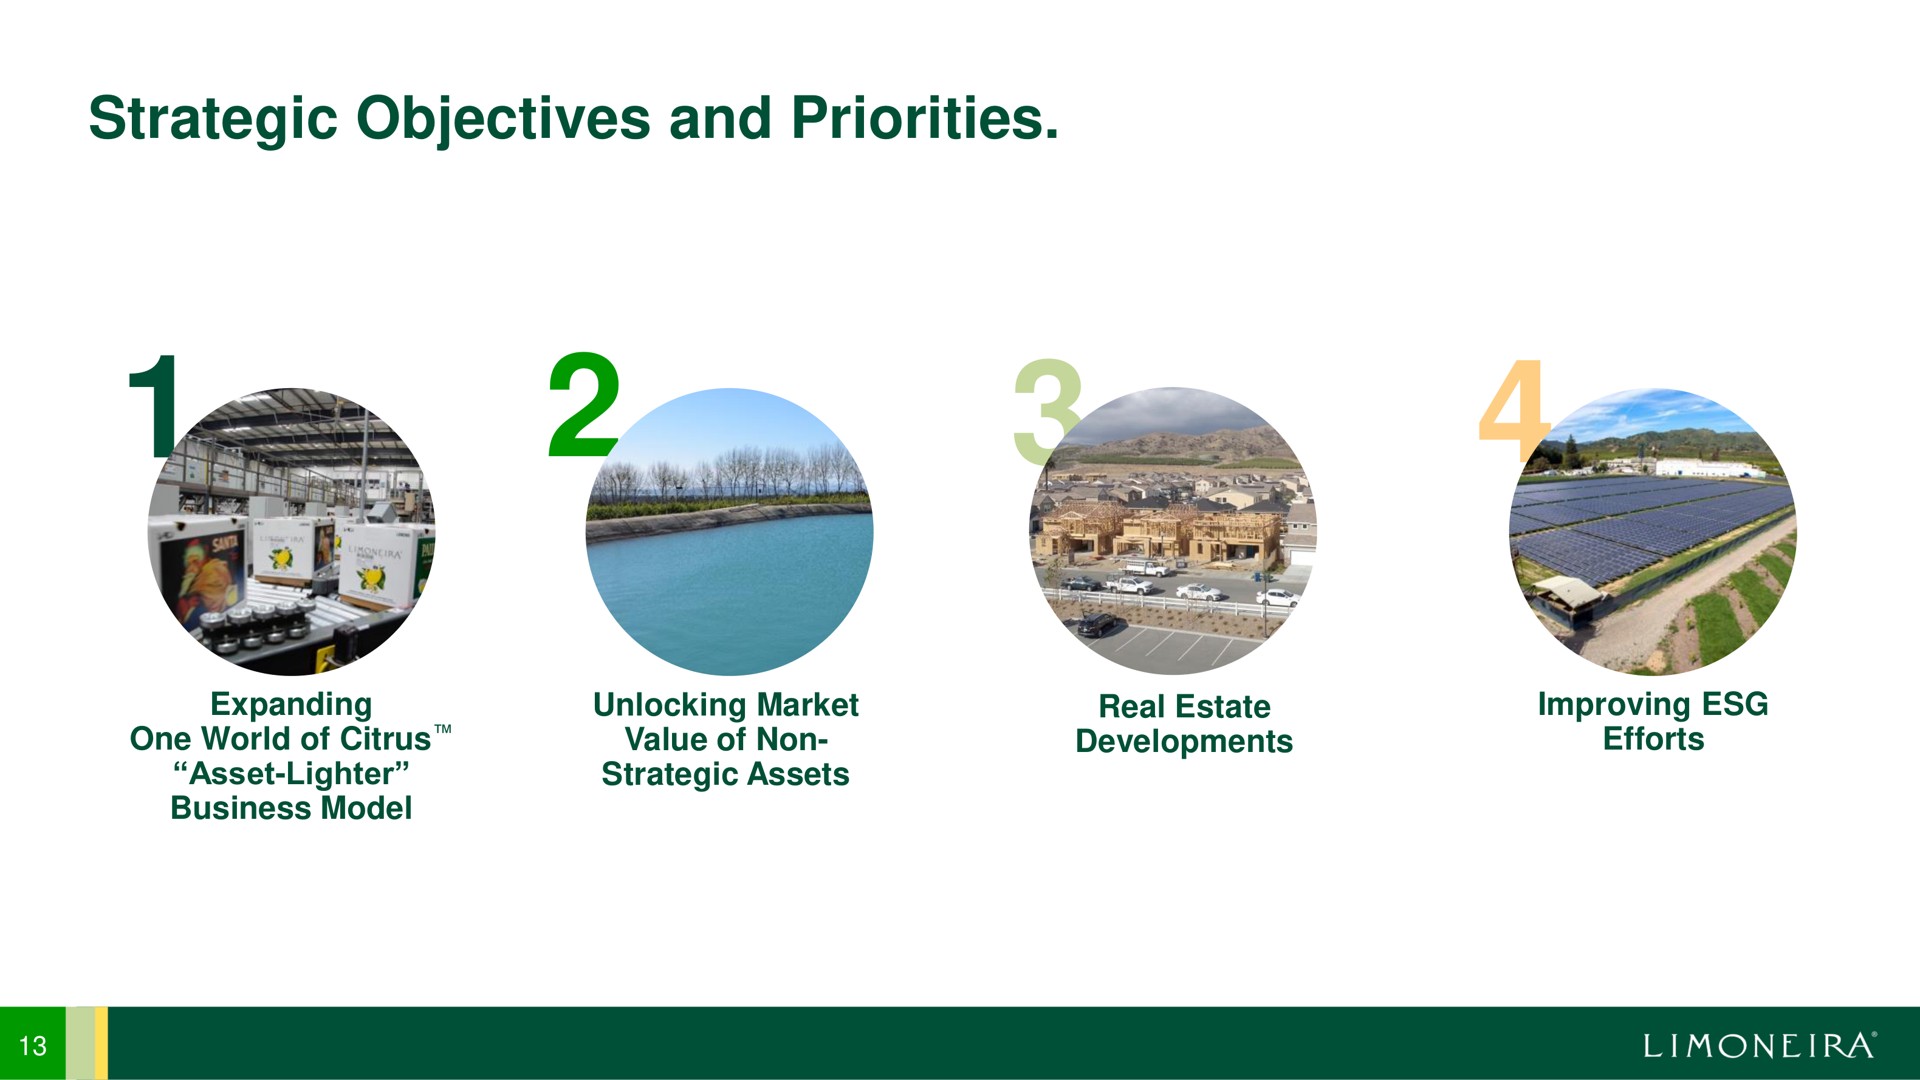 strategic objectives and priorities | Limoneira